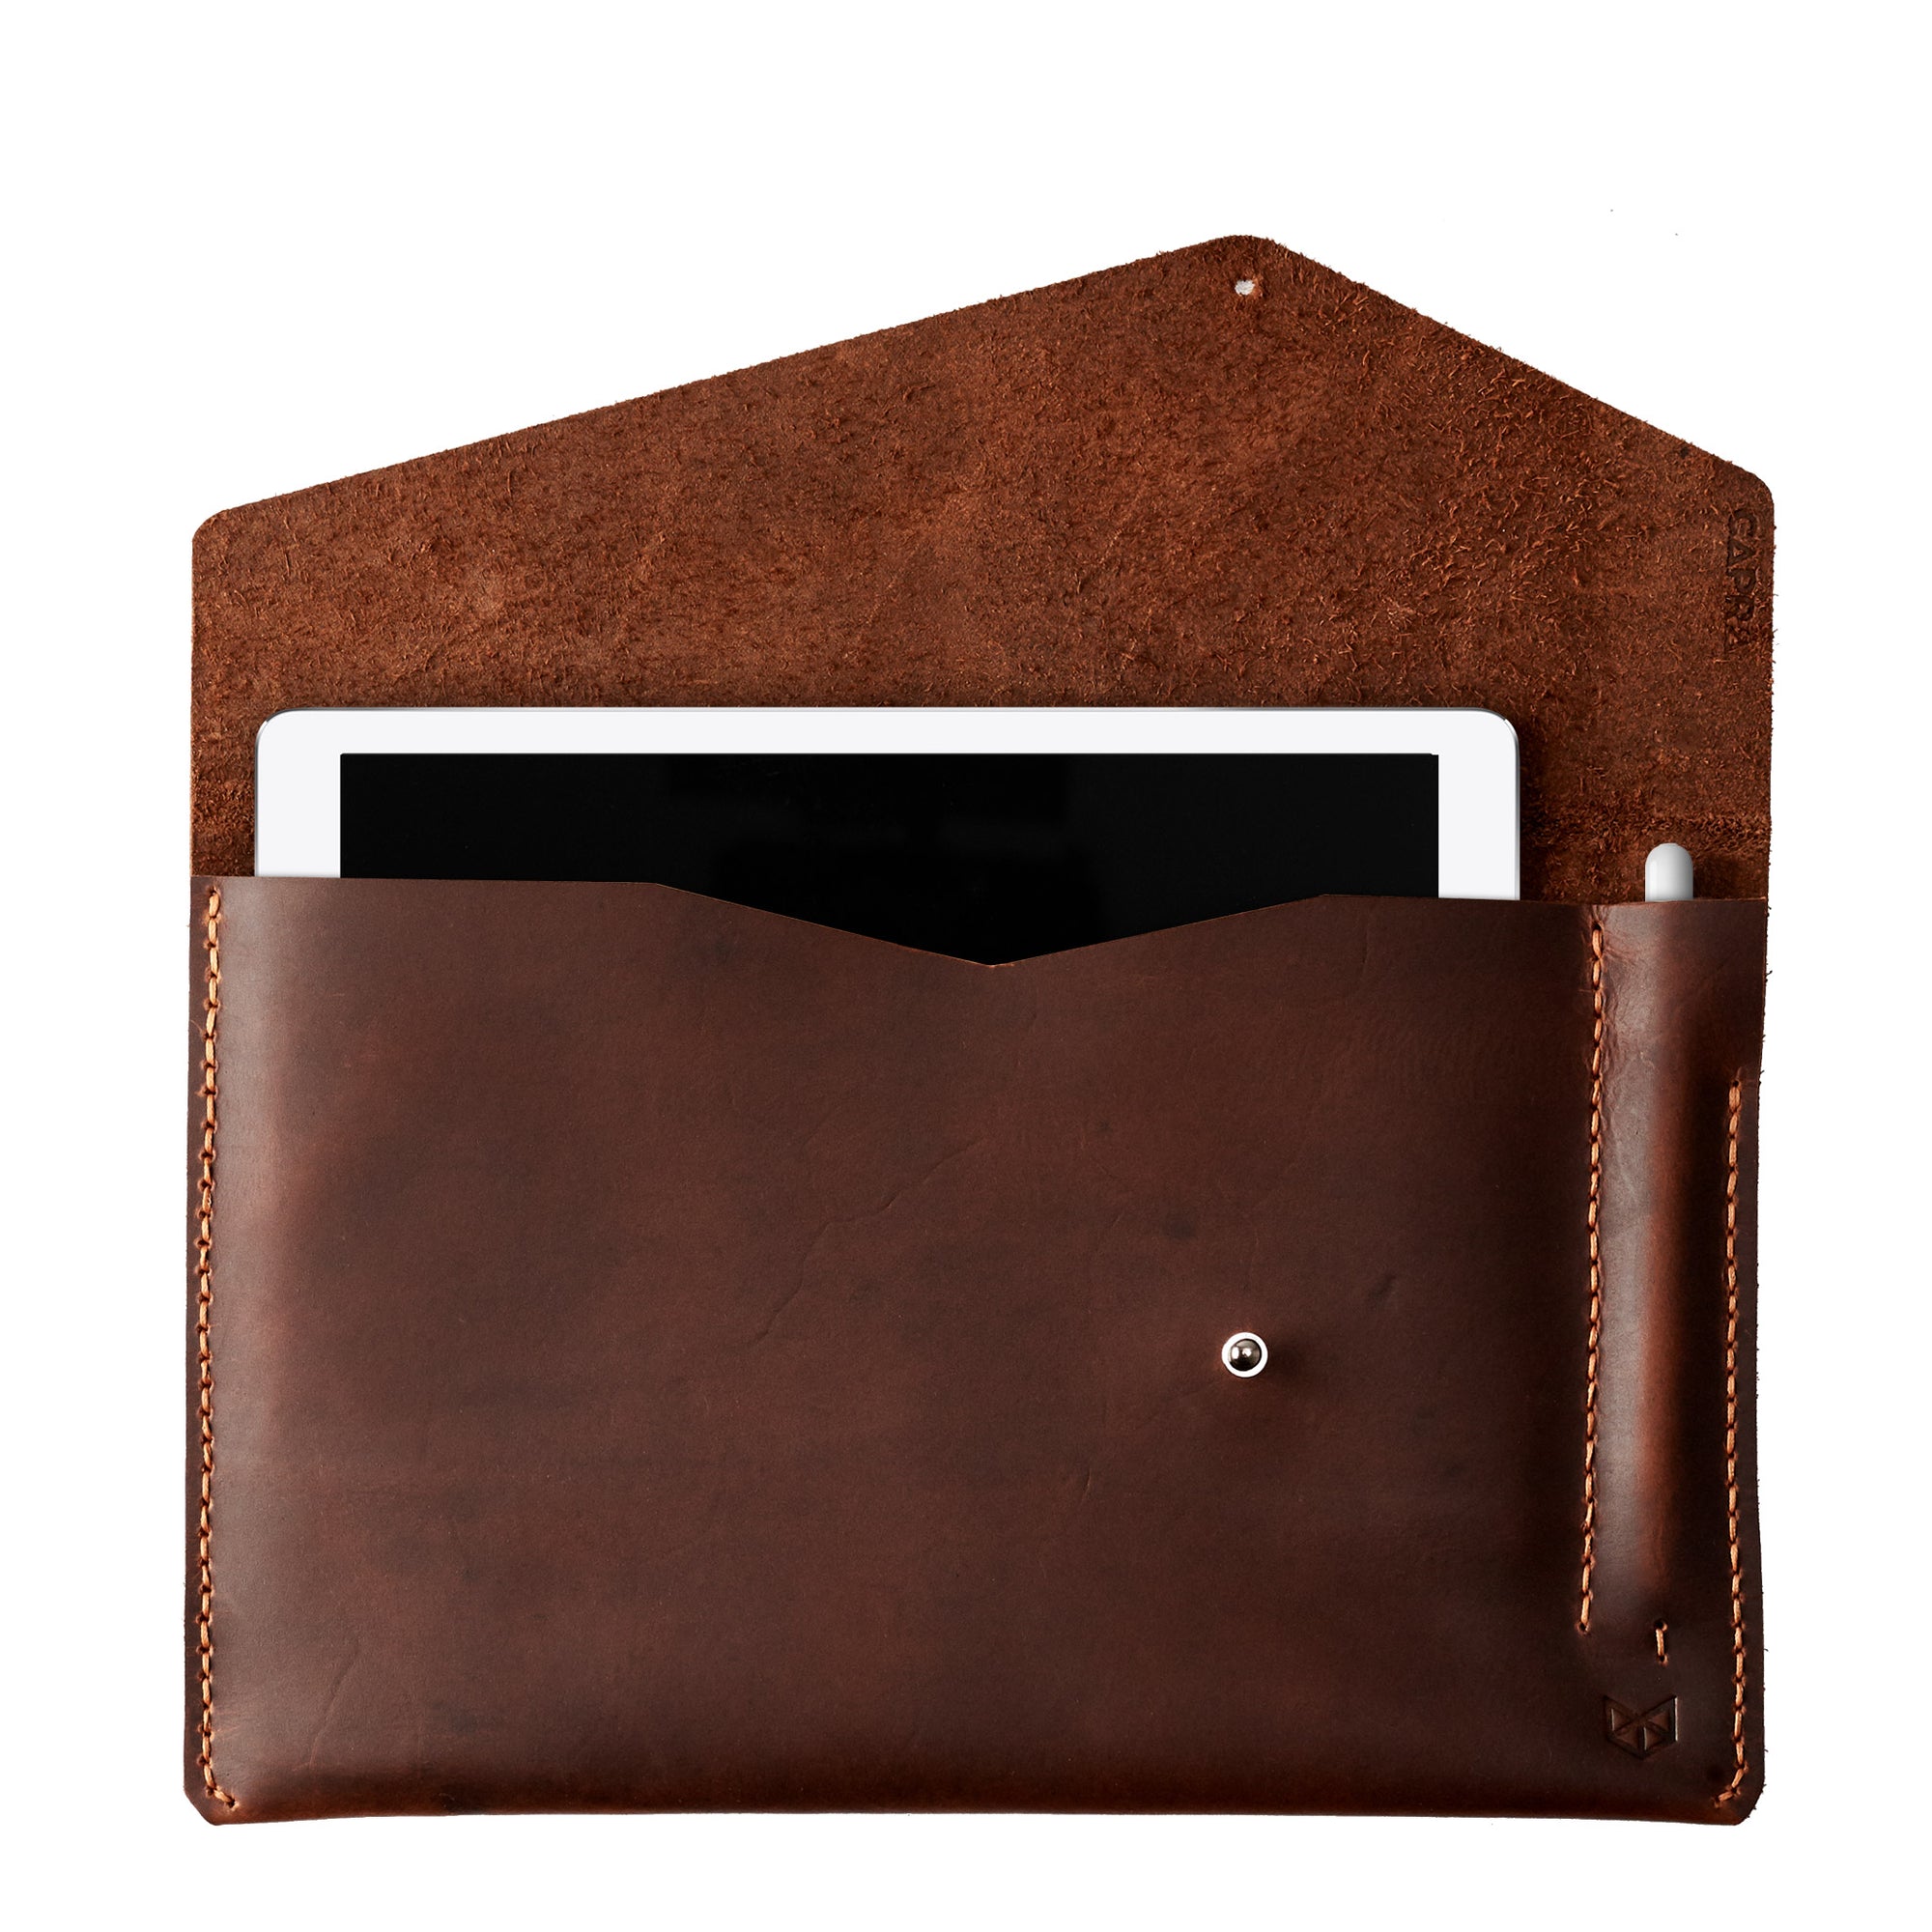 Tan leather sleeve for iPad pro 10.5 inch 12.9 inch. Mens gifts